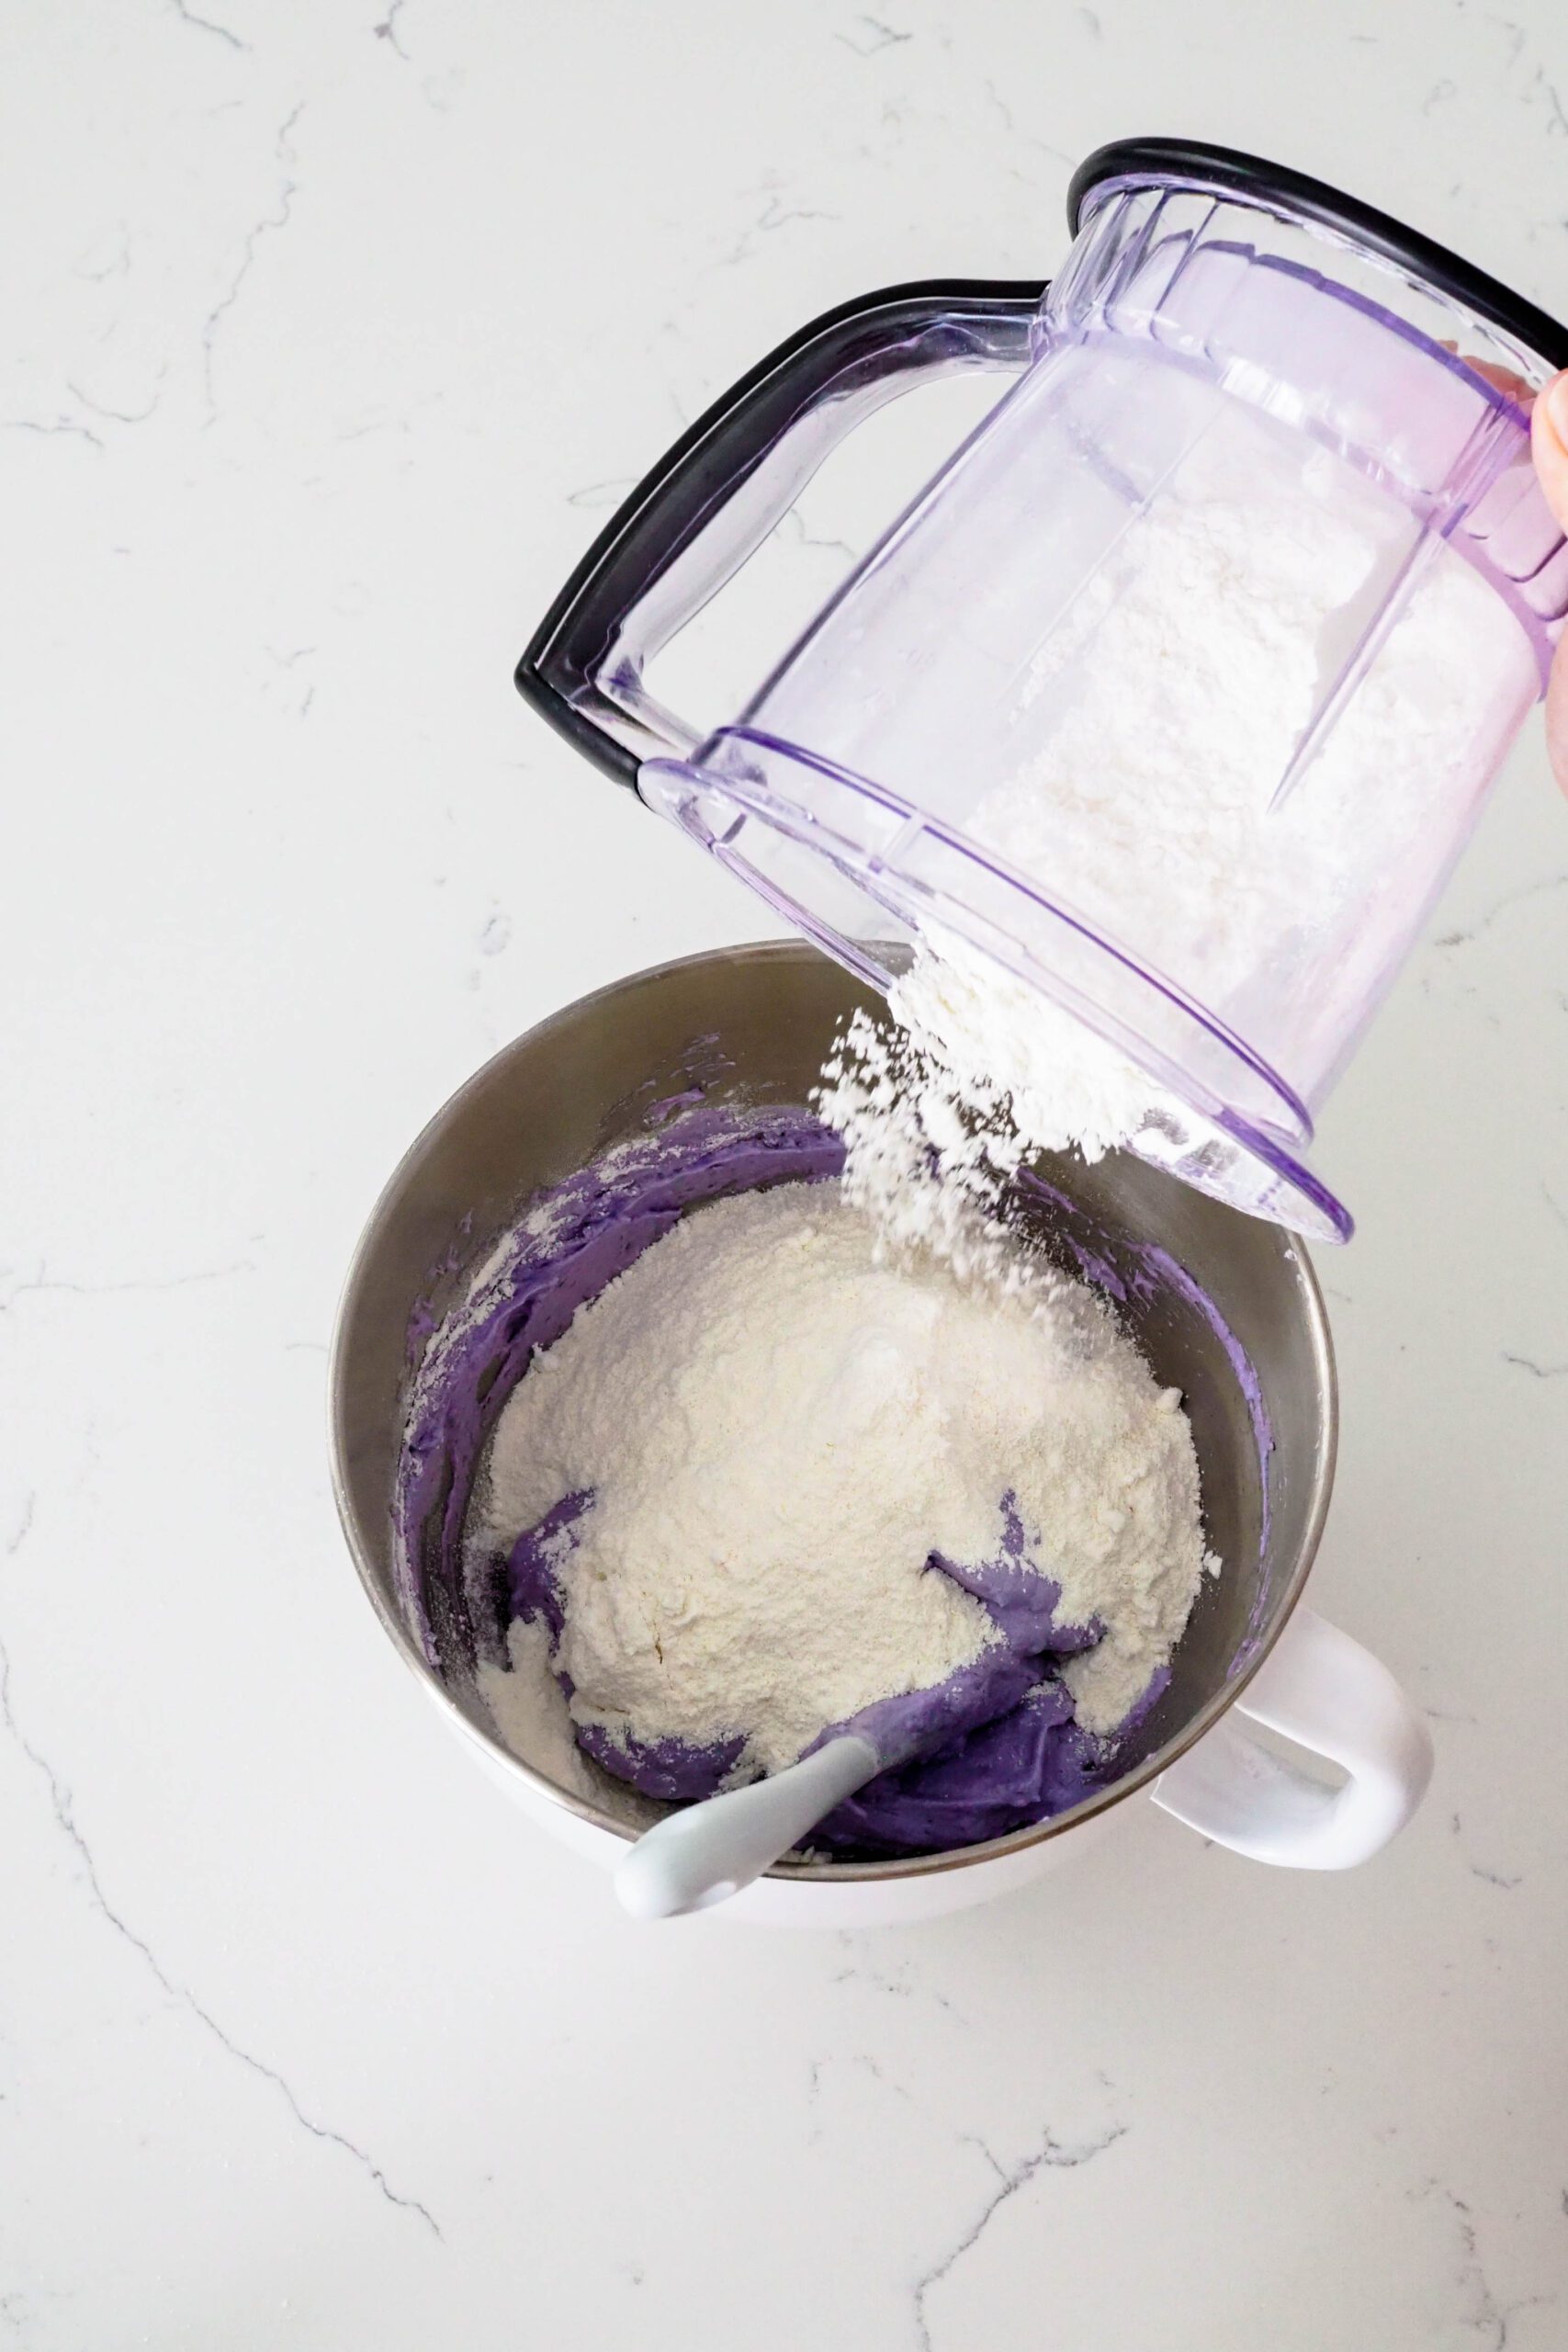 Almond flour and powdered sugar are added to a purple meringue.